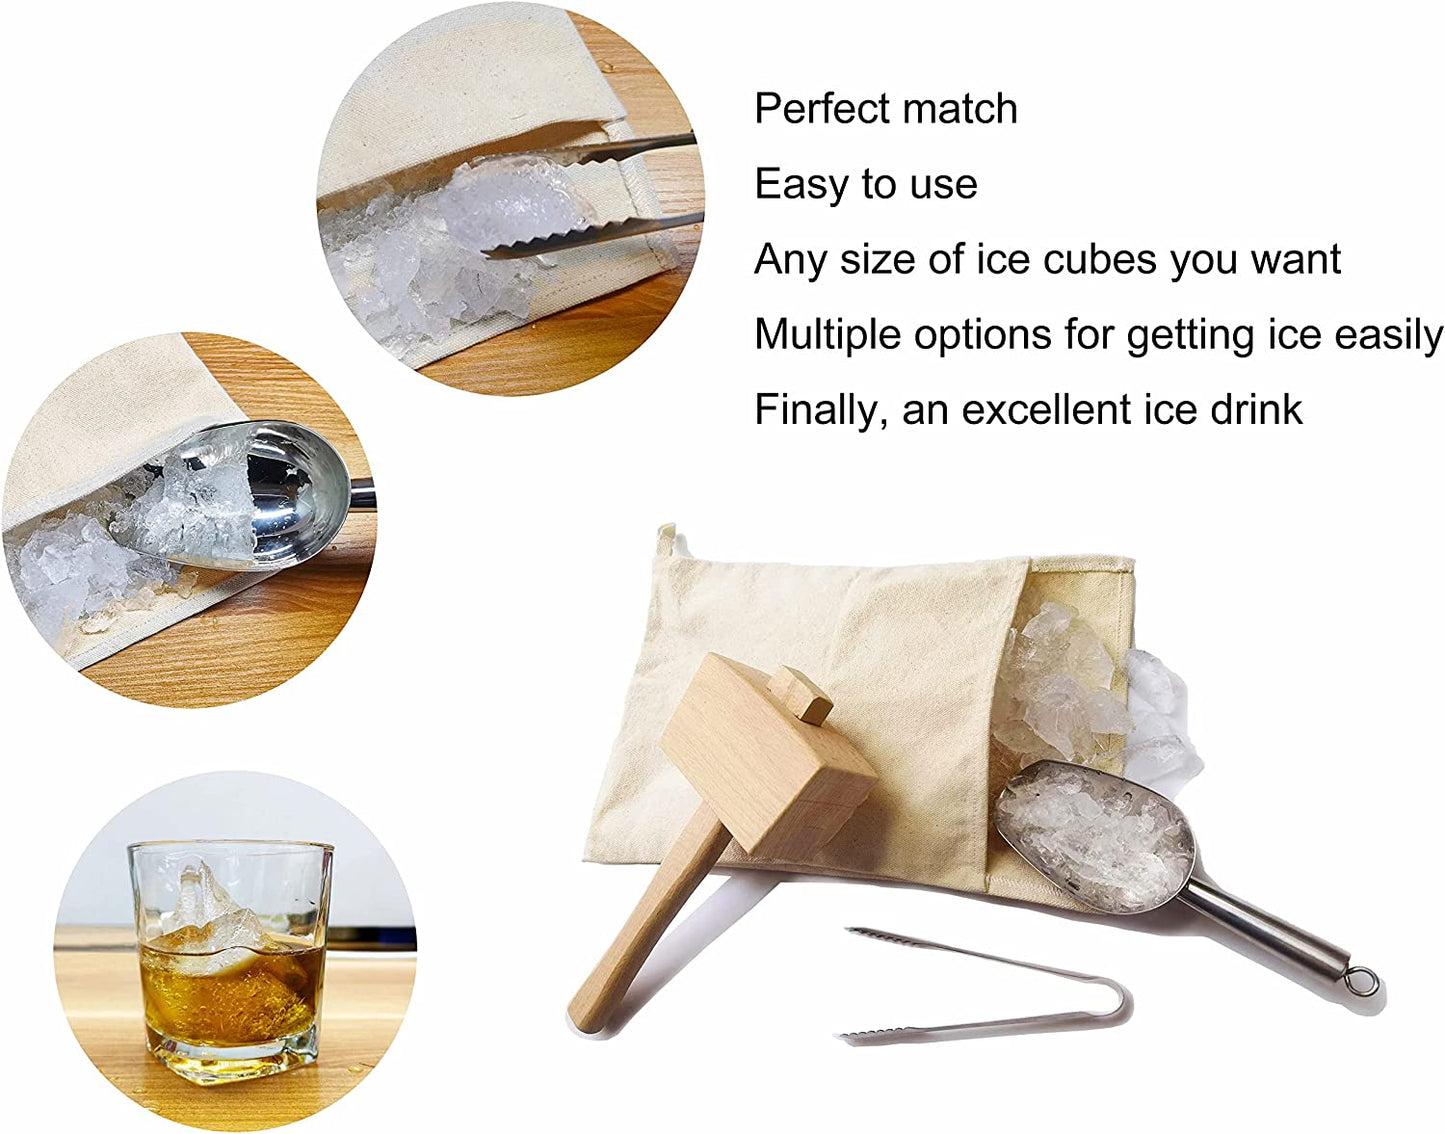 Lewis Bag and Ice Mallet,Ice Scoop and Clip,Manual Ice Crusher,Thick Canvas,Beech Wooden Mallet,Stainless Steel,Crushed Ice,Bar Tools Kitchen Accessories, 4 Pcs Set